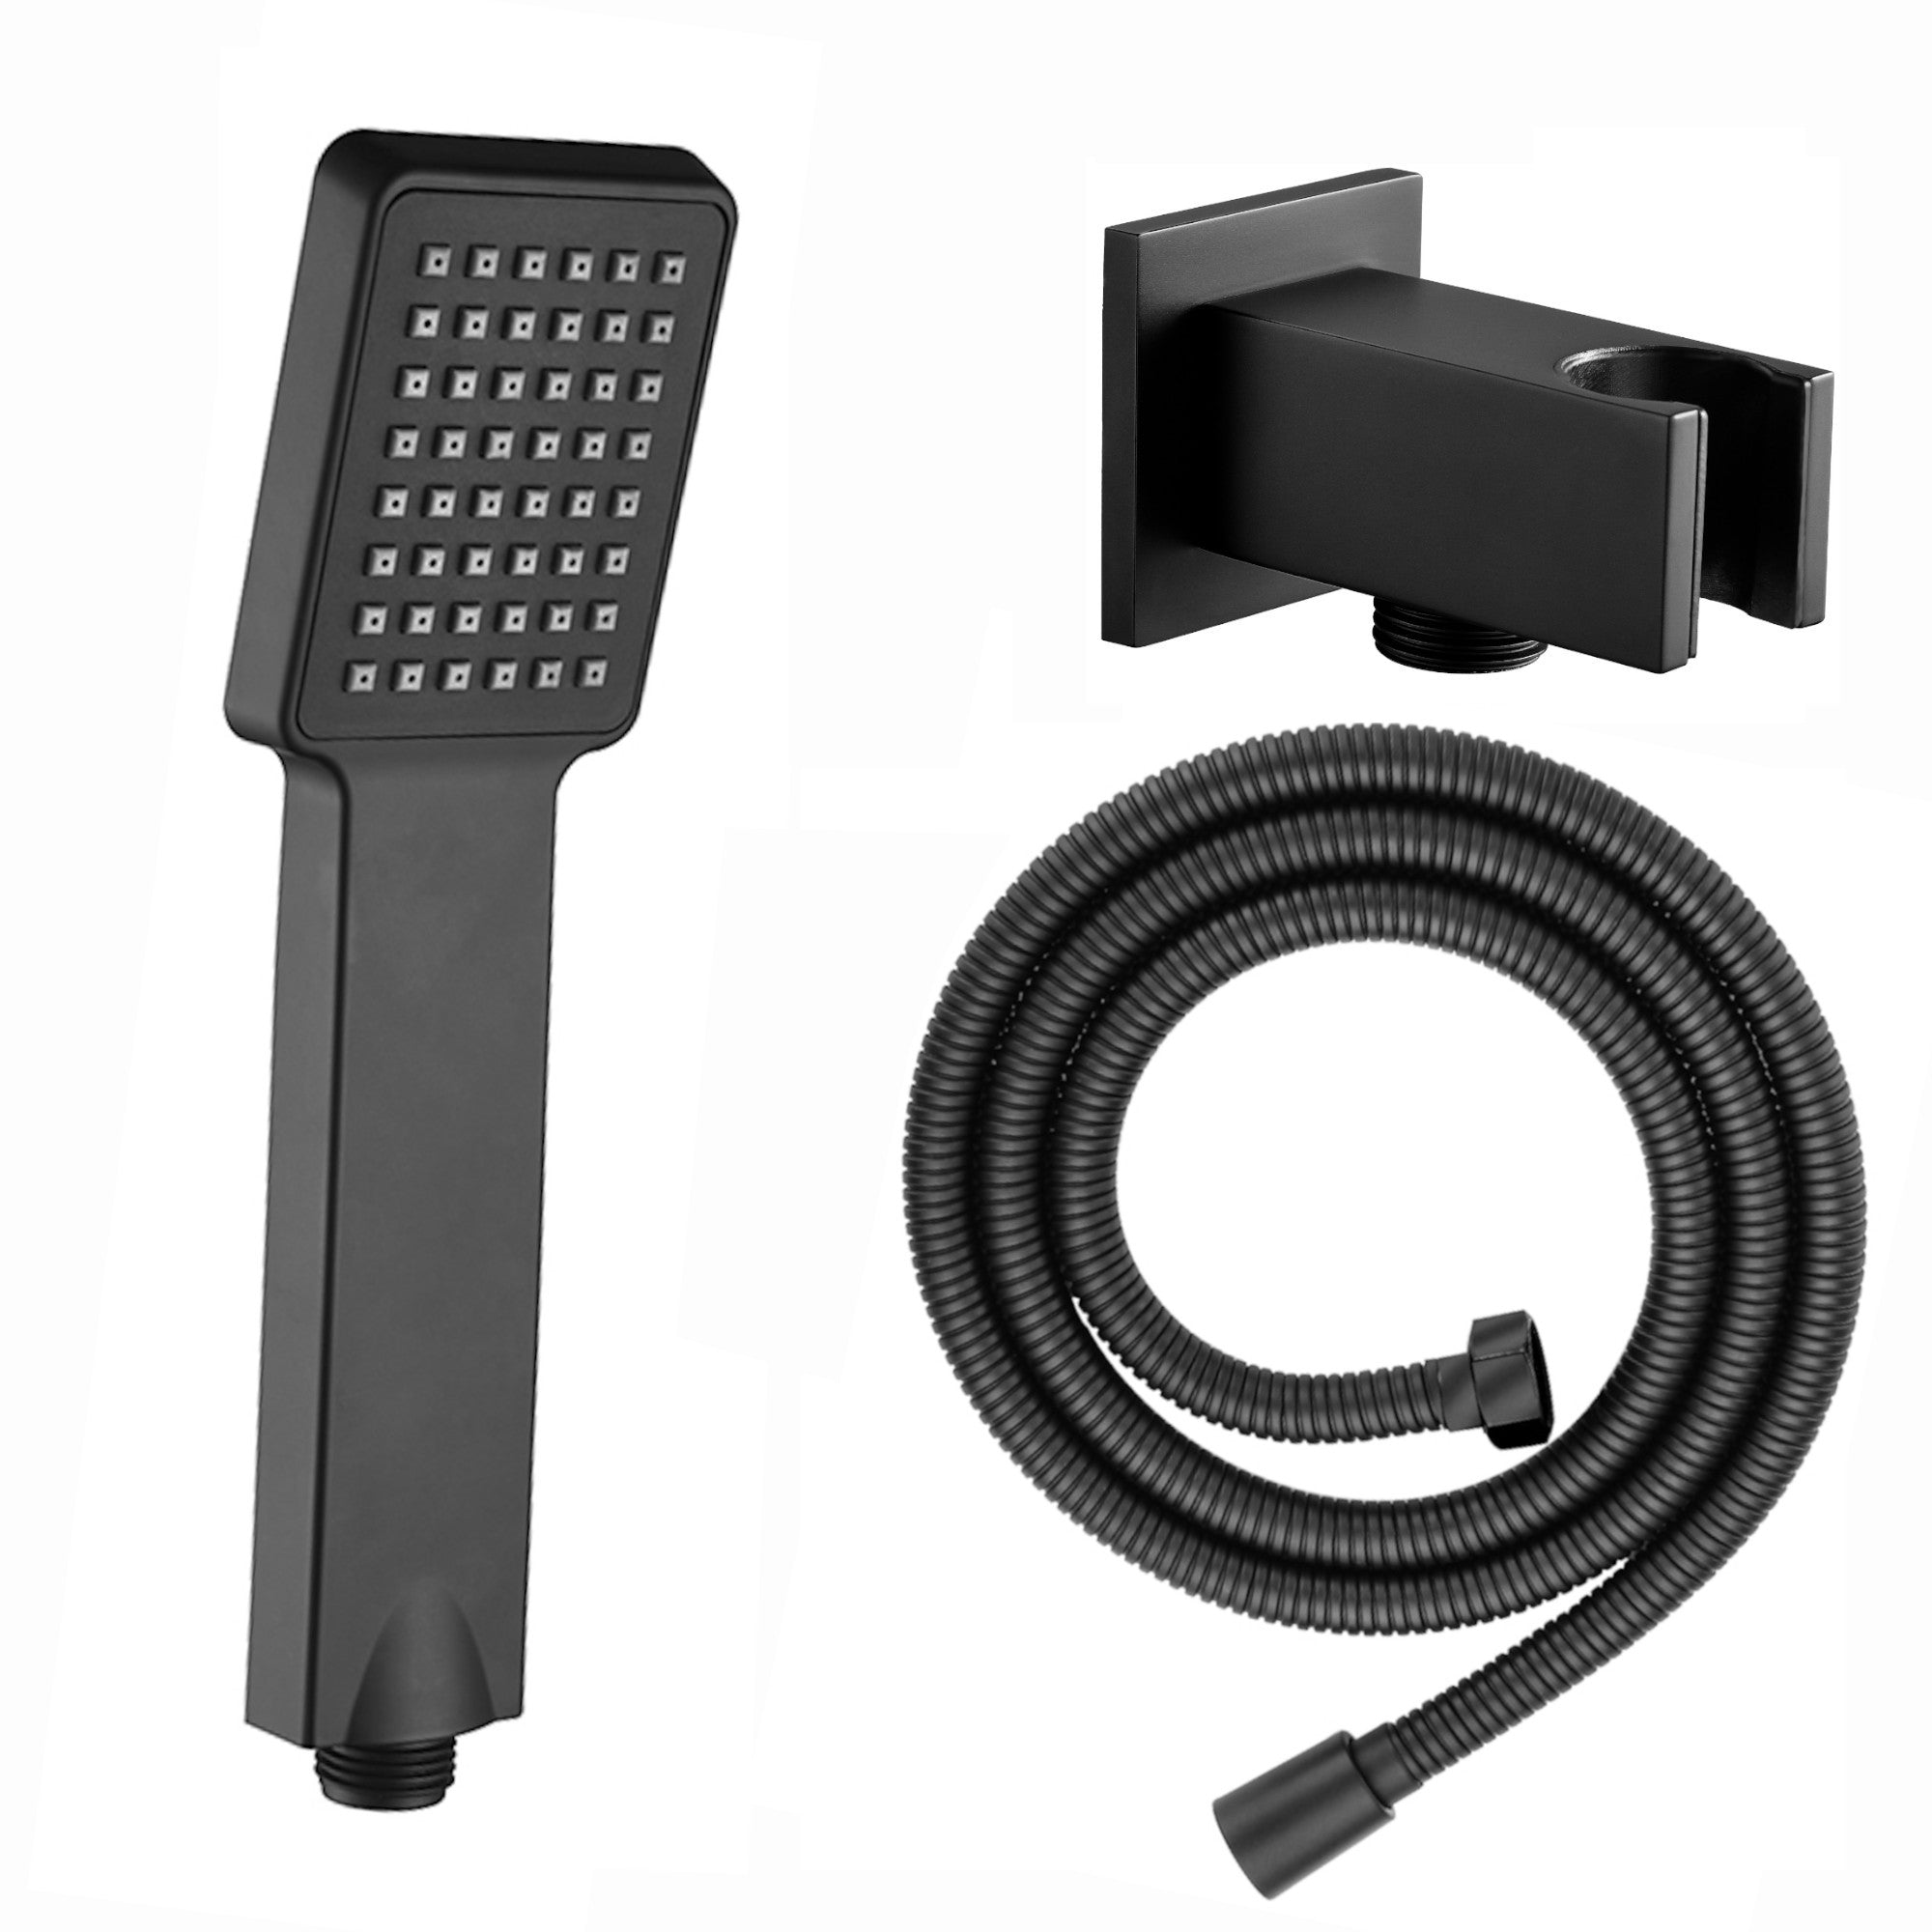 Square Paddle Hand Shower Kit incl. Hose and Wall Bracket with Outlet - Black